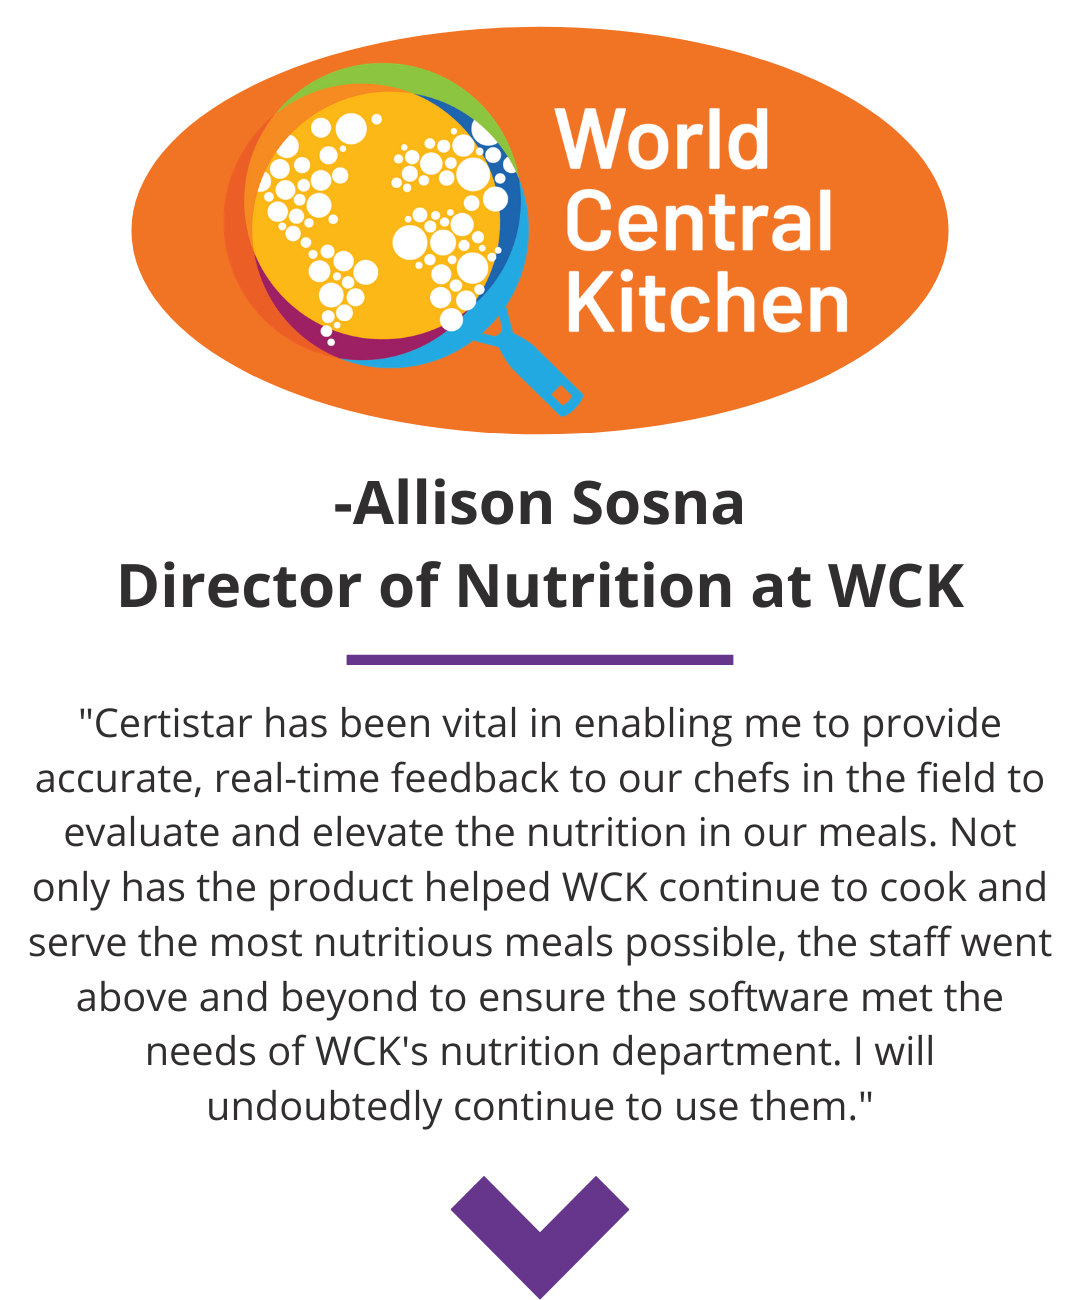 World Central Kitchen Quote CertiStar has been vital in enabling me to accurate, real time feedback to our chefs in the field. The staff went above and beyond to ensure the software met the needs of World Central Kitchen